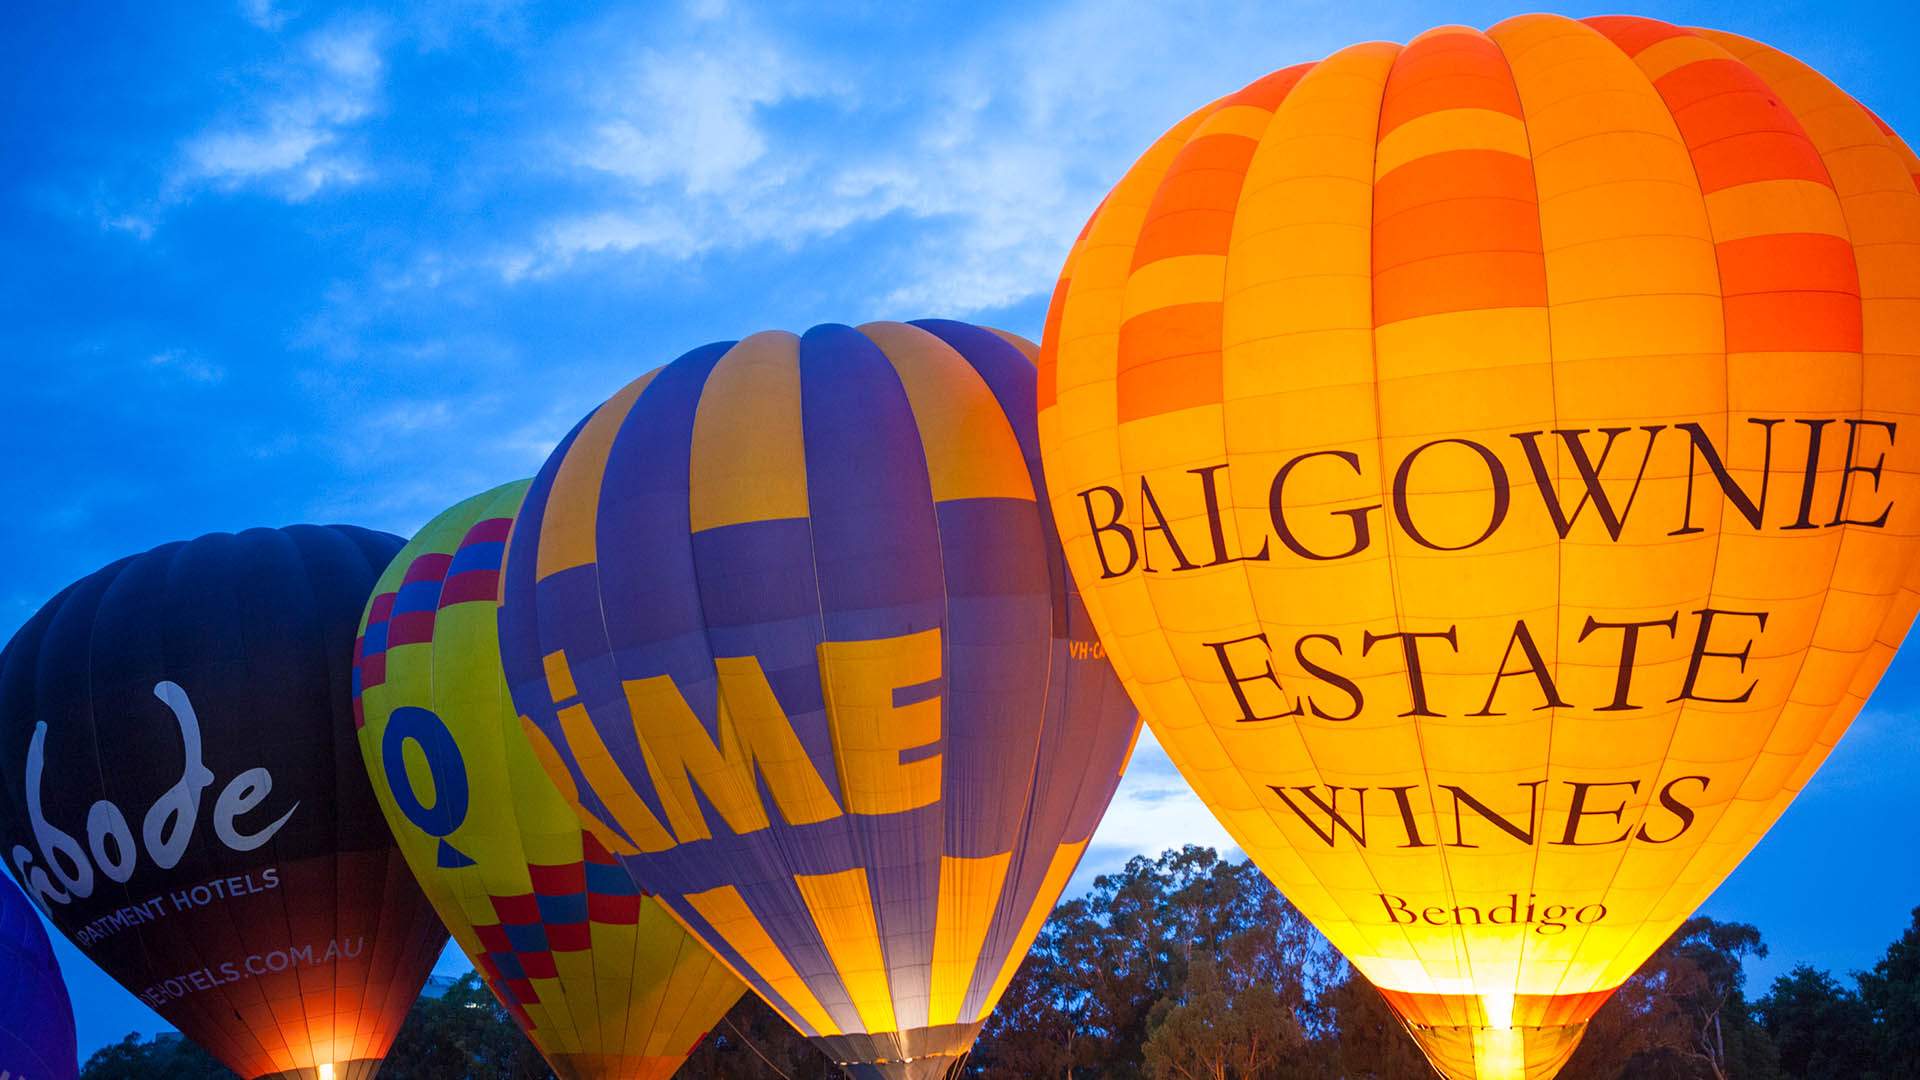 The Canberra Balloon Spectacular